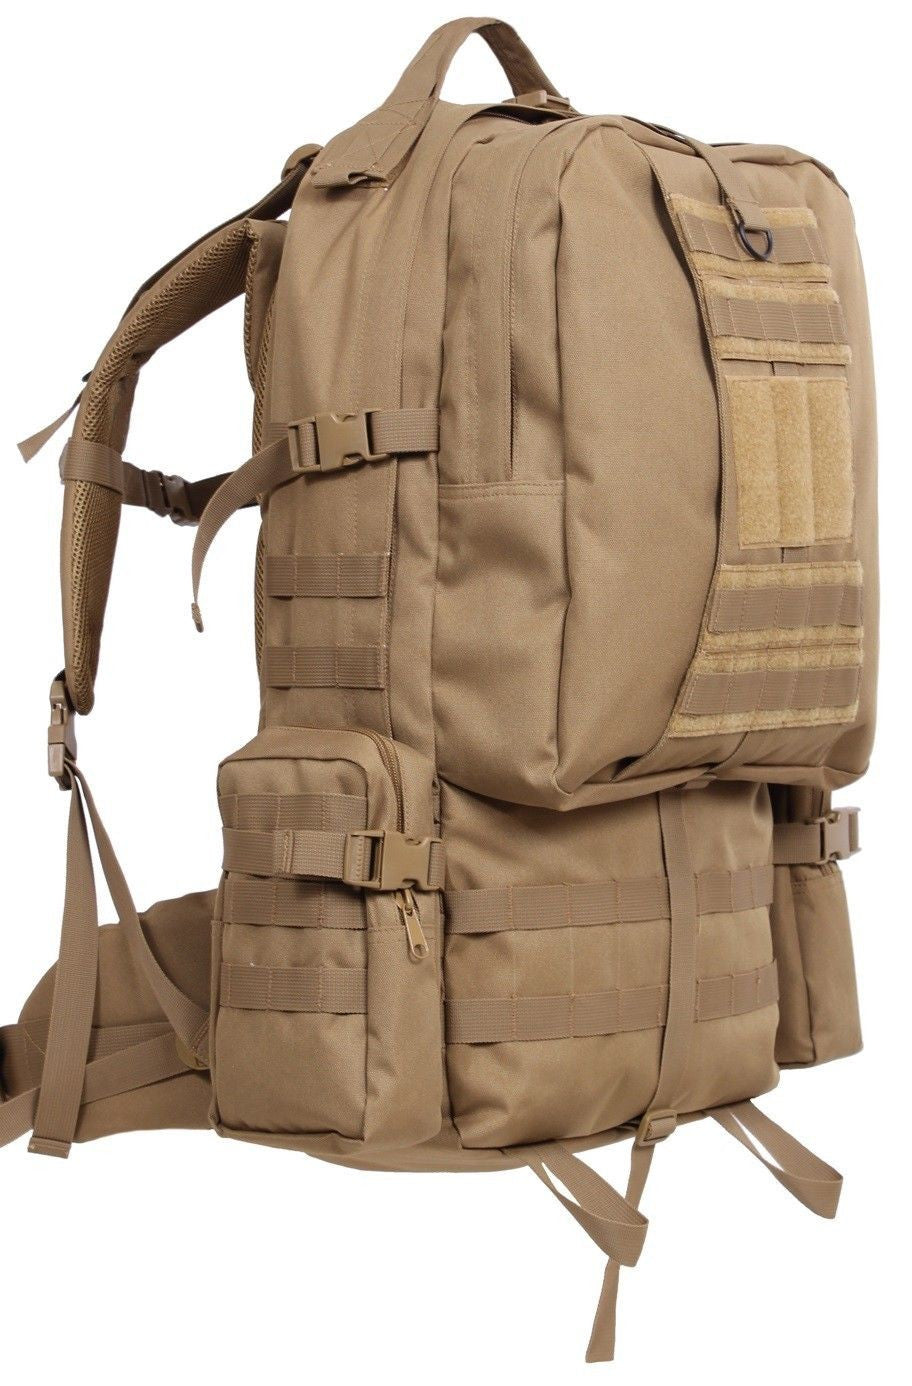 Coyote Brown 3-Day Global Pack 25 Tactical MOLLE Outdoor Gear Bag – Grunt  Force